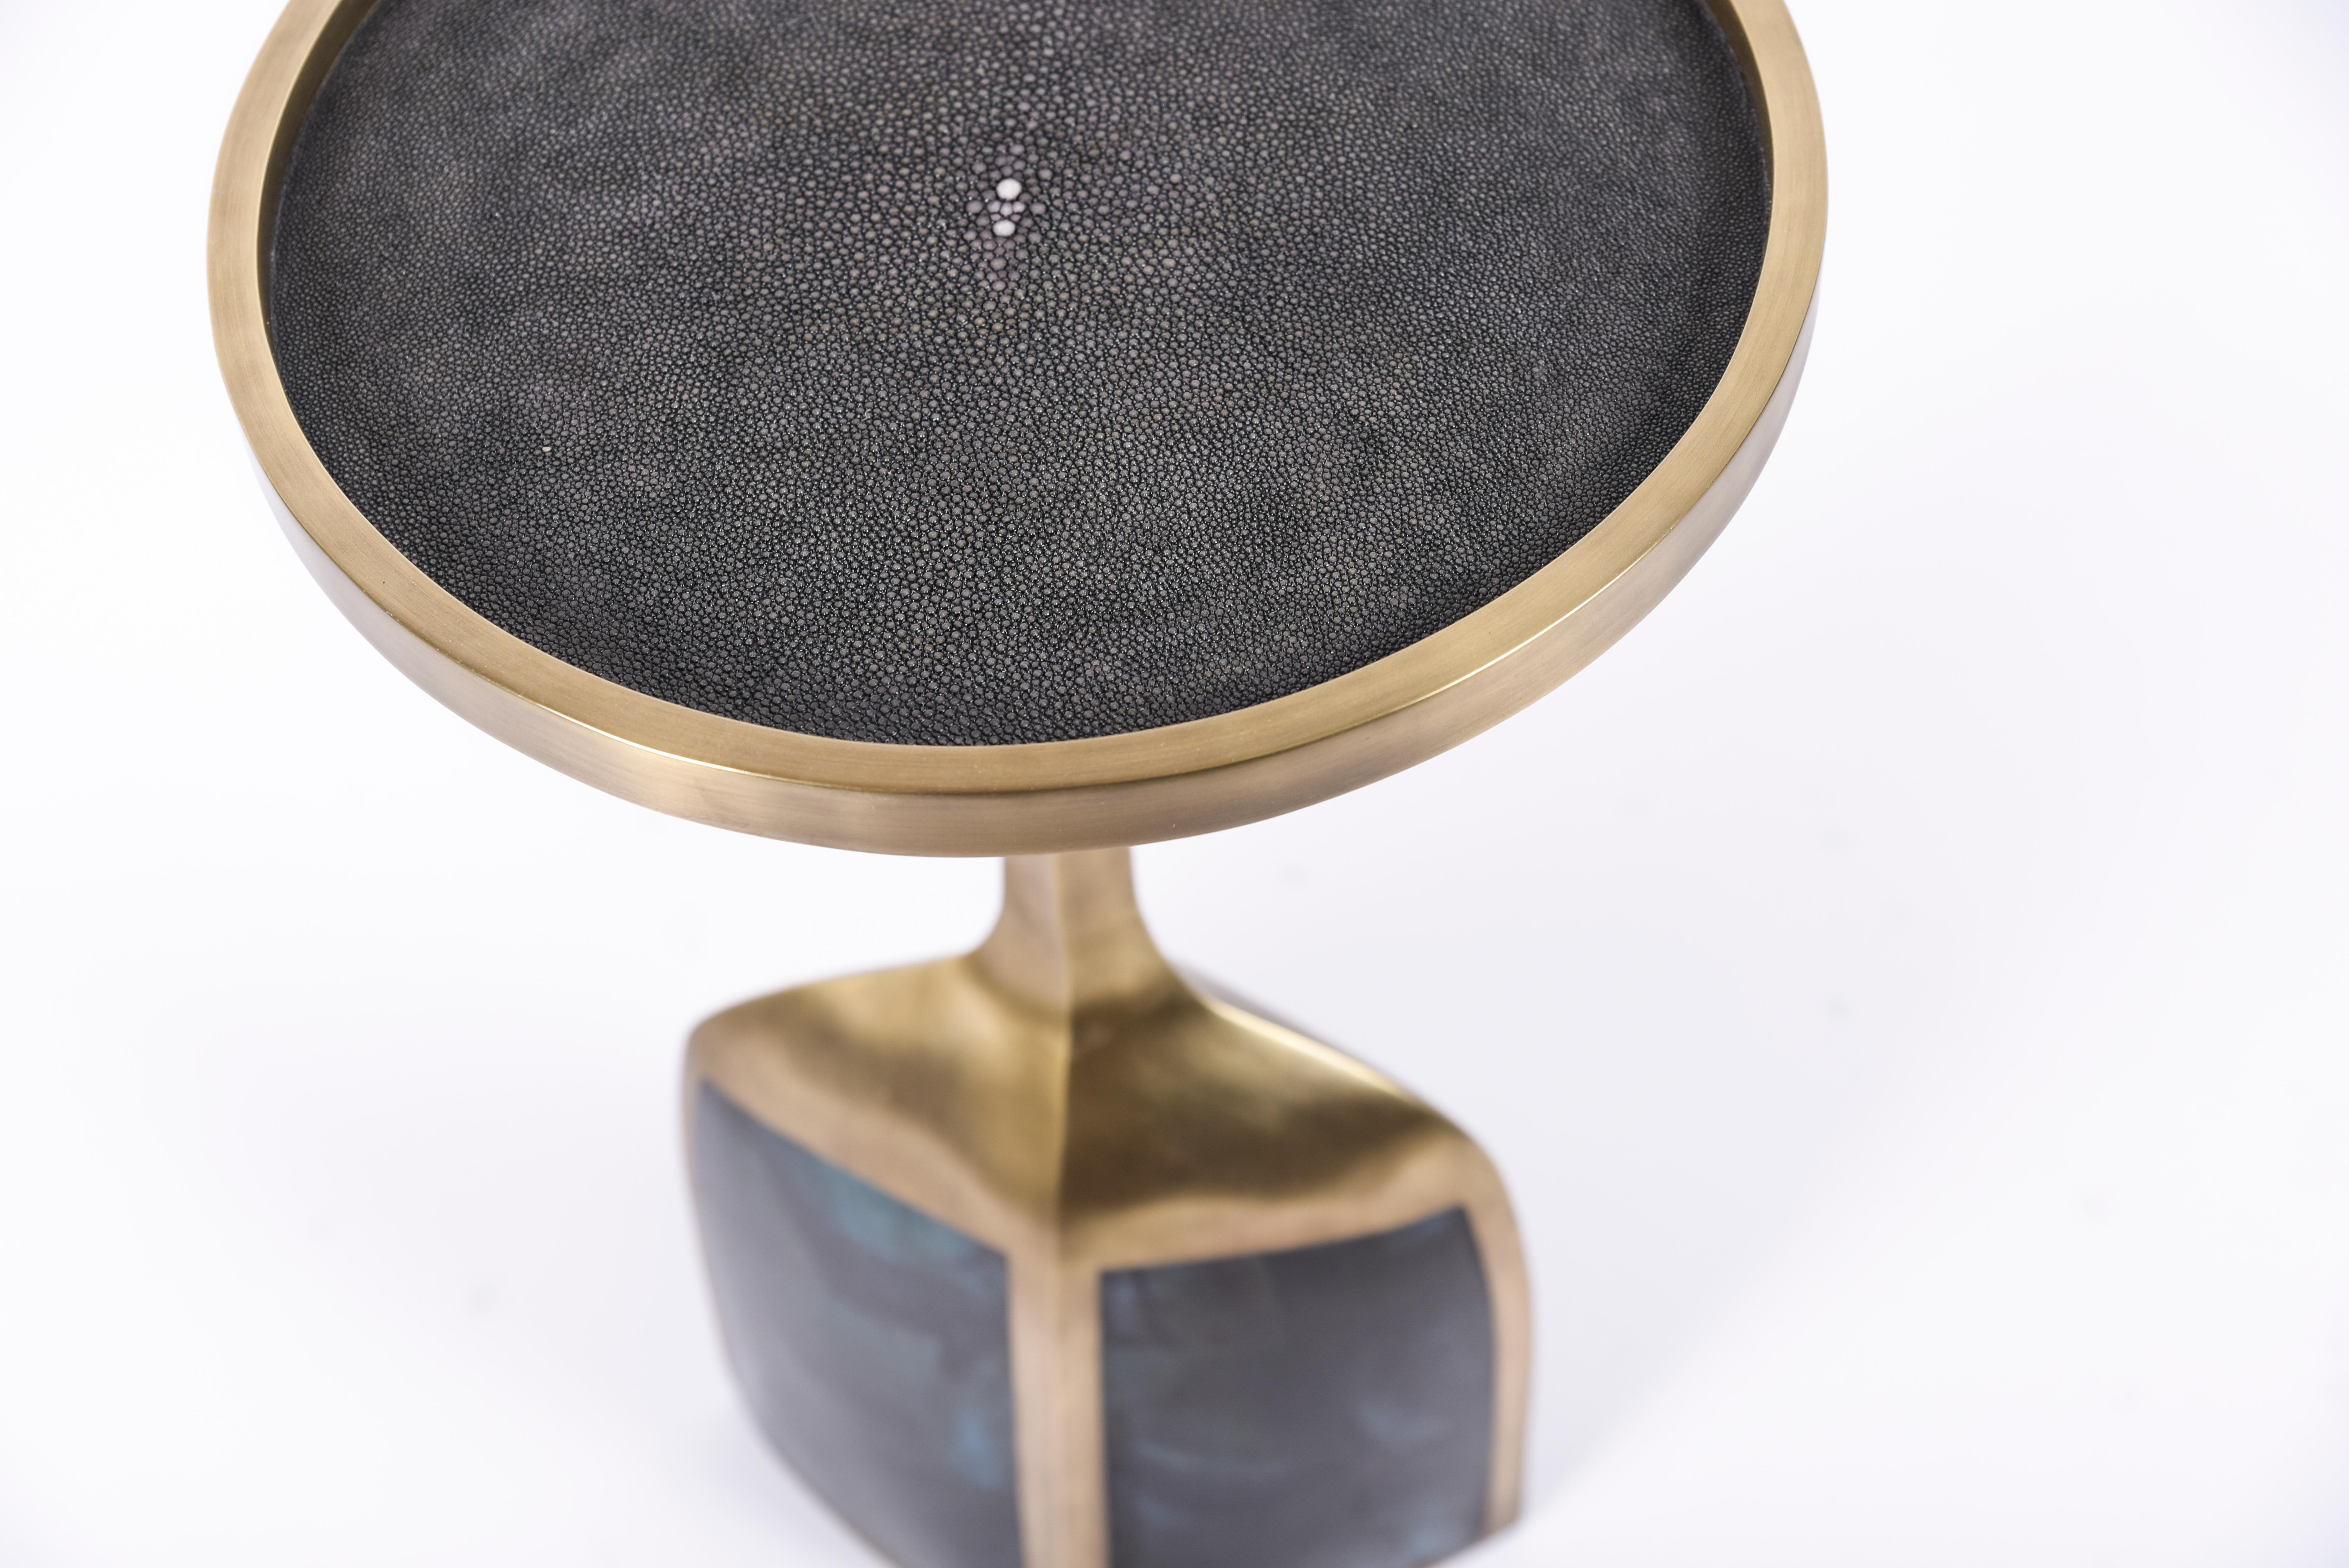 The pedestal side large is the perfect end table that is easily adaptable in any space and due to its lightweight nature easy to move around. The large size is inlaid on the top surface with coal black Shagreen, the bottom part a mixture of coal